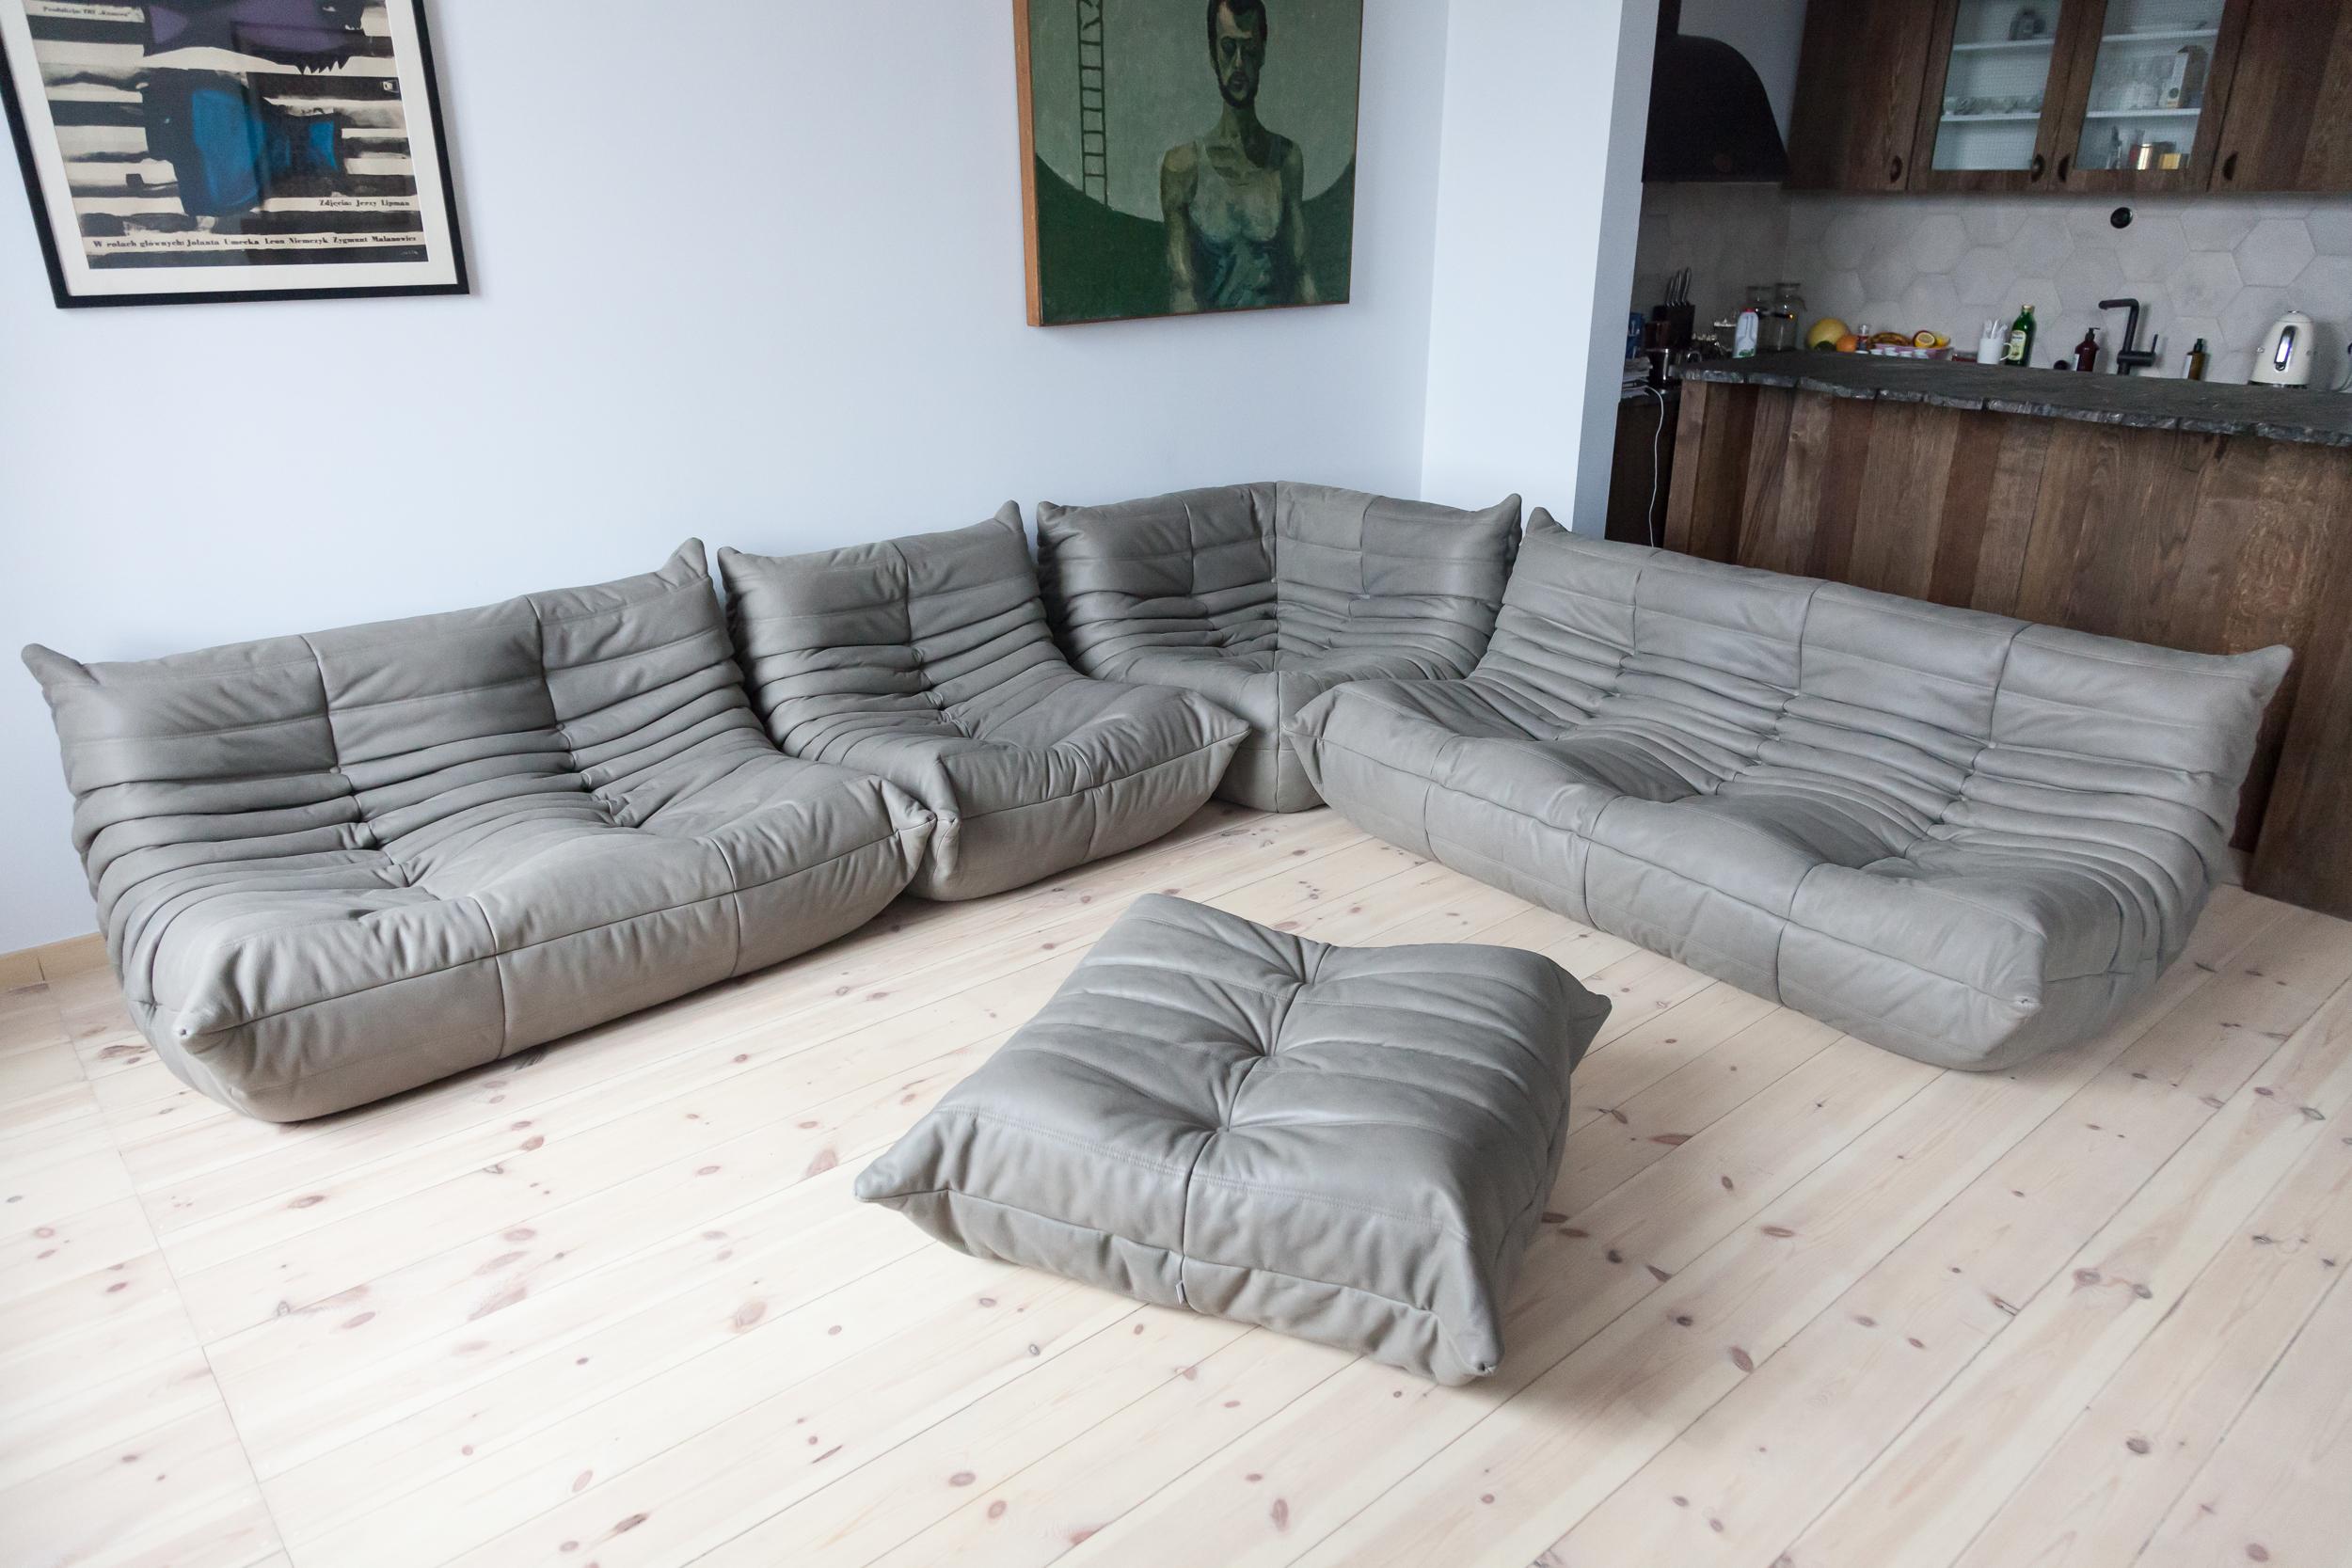 This Togo living room set was designed by Michel Ducaroy in 1973 and was manufactured by Ligne Roset in France. It has been reupholstered in new elephant grey leather and is made up of the following pieces: One three-seat couch (70 x 174 x 102 cm),